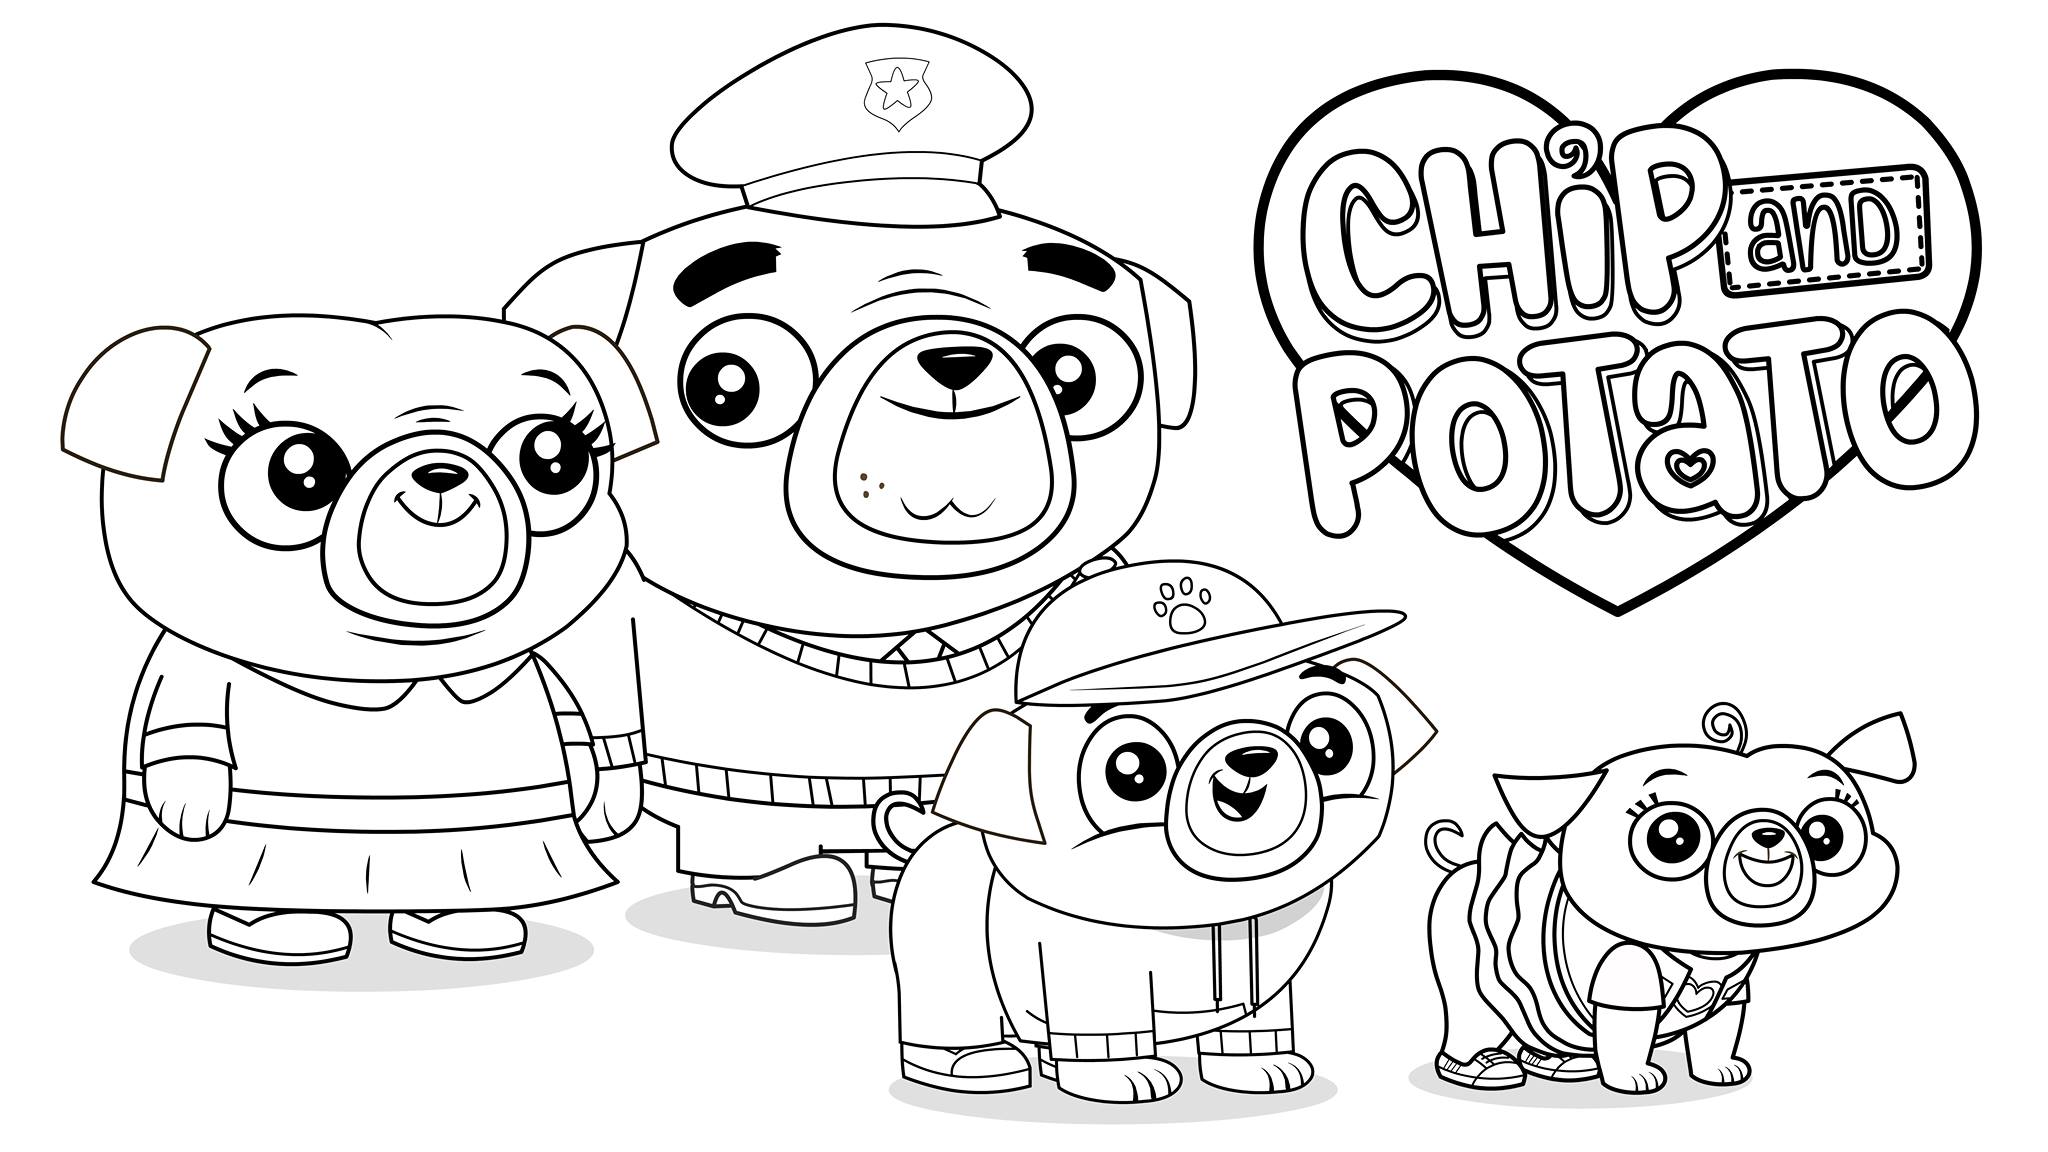 Chip and Family Colouring Sheet